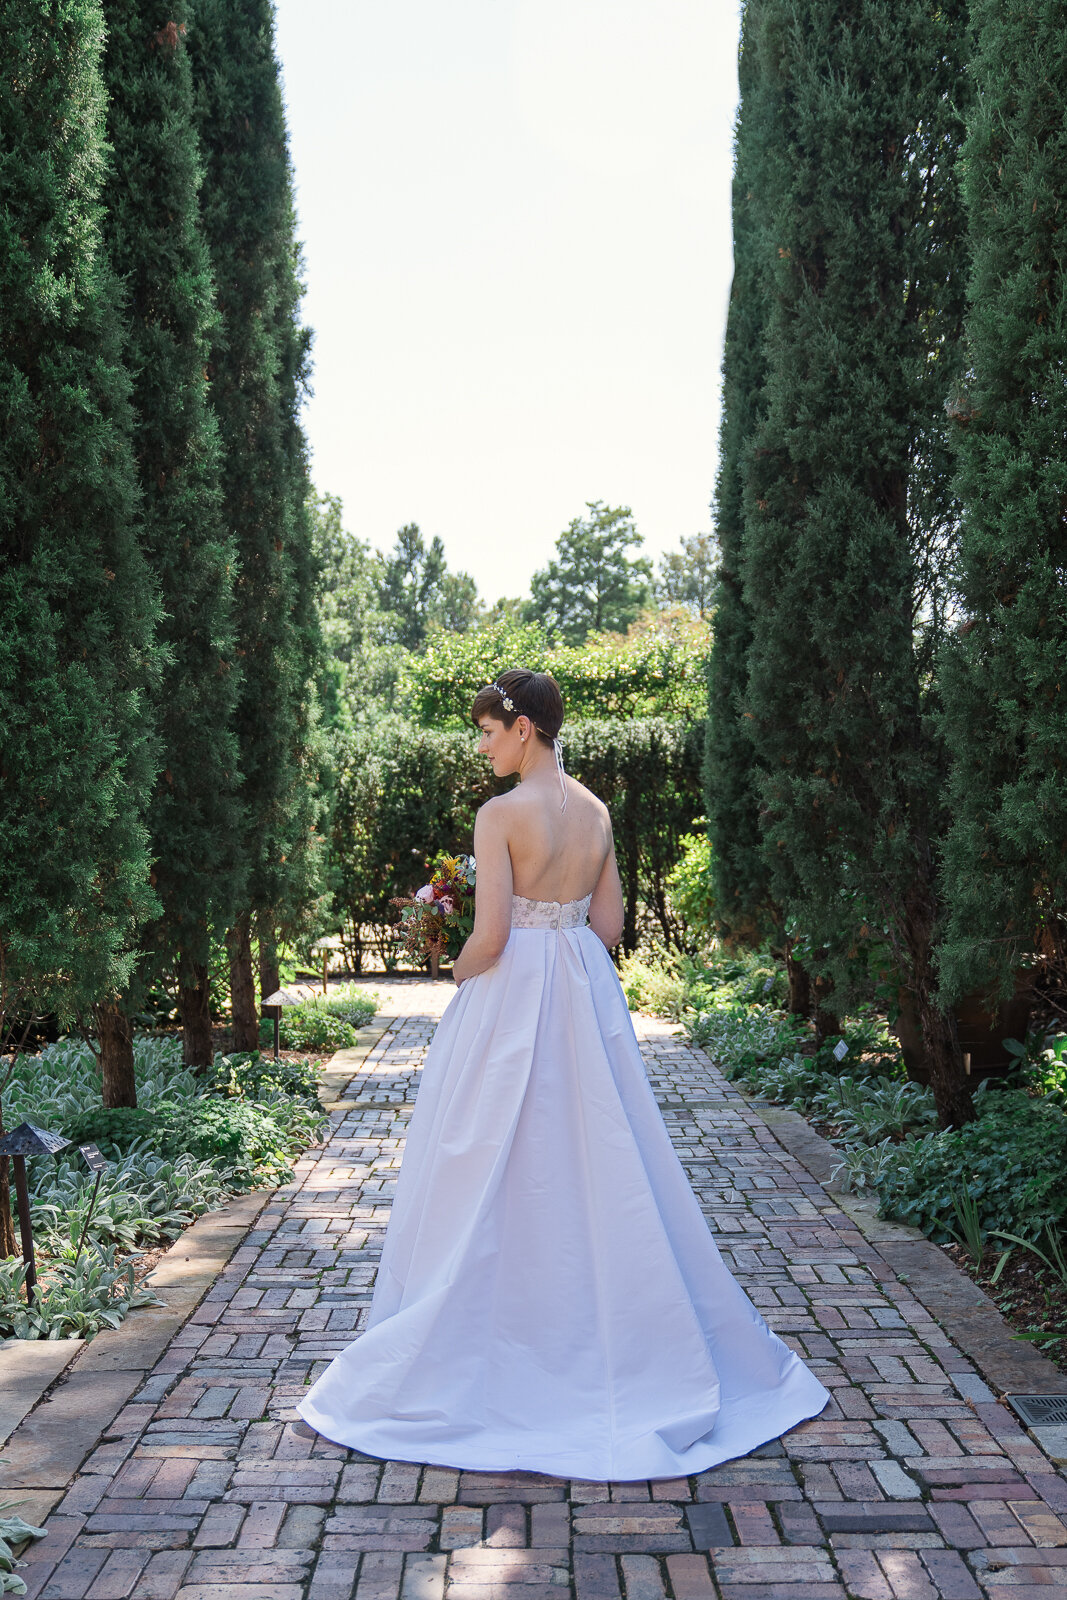 Elegant Bridal portrait surrounded by Cypress Tress in St. Louis Missouri